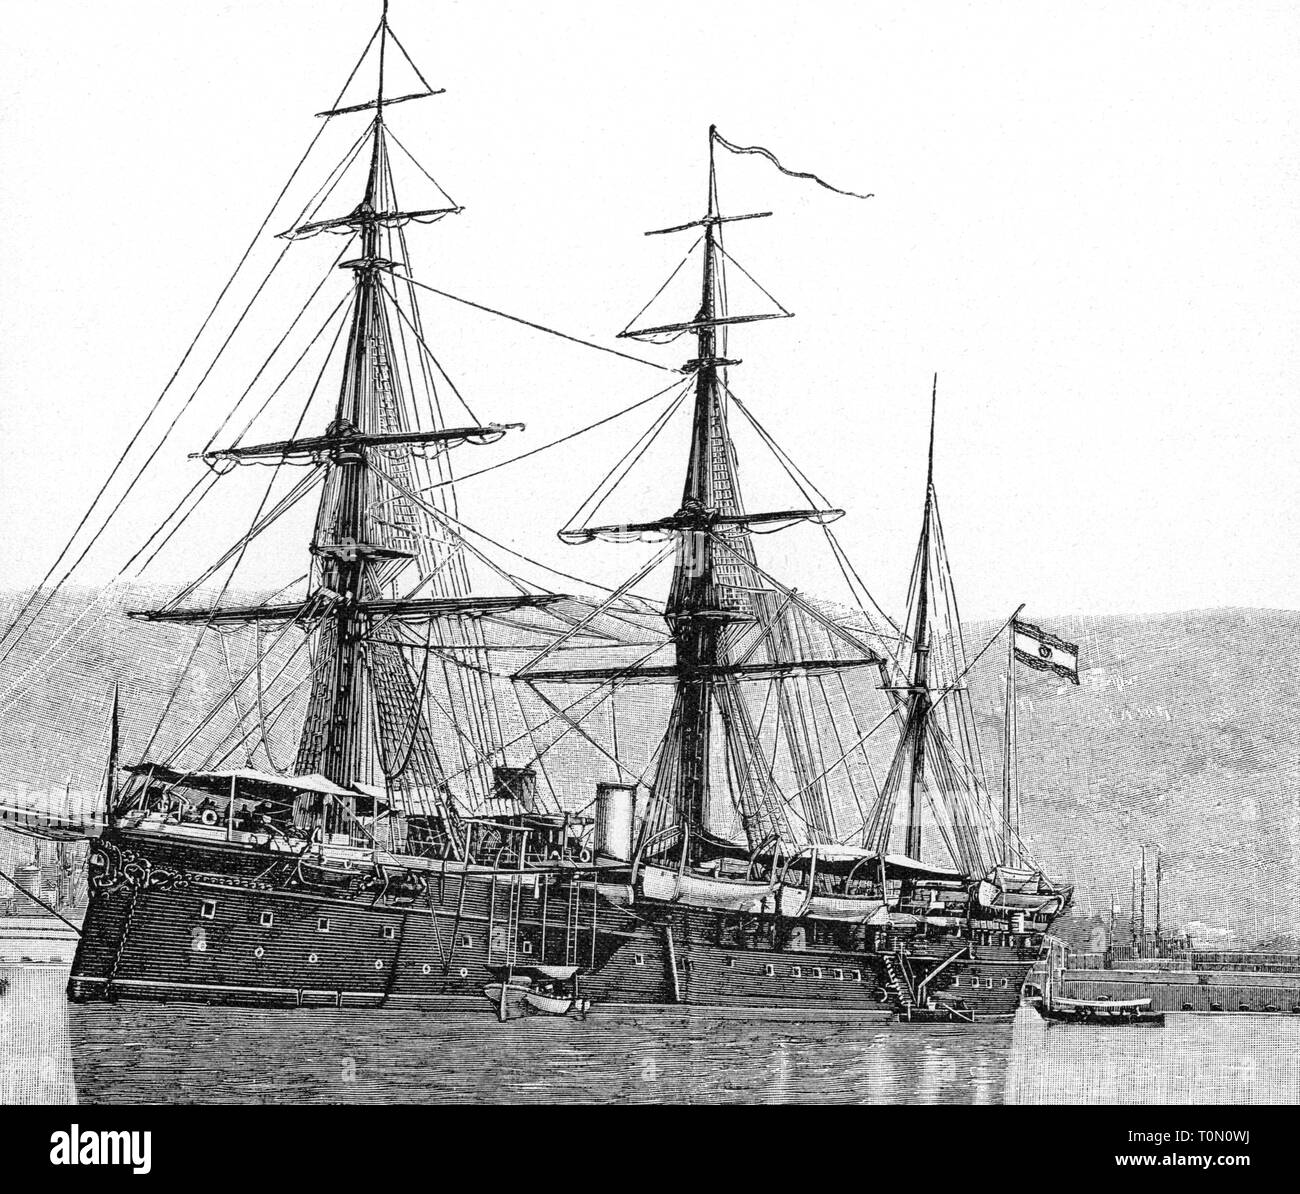 transport / transportation, navigation, warships, Spanish unprotected cruiser Reina Cristina, flagship of admiral Patricio Montojo in the Battle of Manila Bay, 1.5.1898, wood engraving, 'Illustrierte Chronik der Zeit', 1898, Spanish navy, Armada Espanola, Kingdom of Spain, man-of-war, Alfonso-XII-Class, Alfonso XII class, sail steamer, ships, ship, steamship, steamships, Spanish-American War, Cuban War of Independence, Spanish American War, Spanish - American war, Philippines, military, armed forces, naval forces, navy, 19th century, no-people, t, Additional-Rights-Clearance-Info-Not-Available Stock Photo